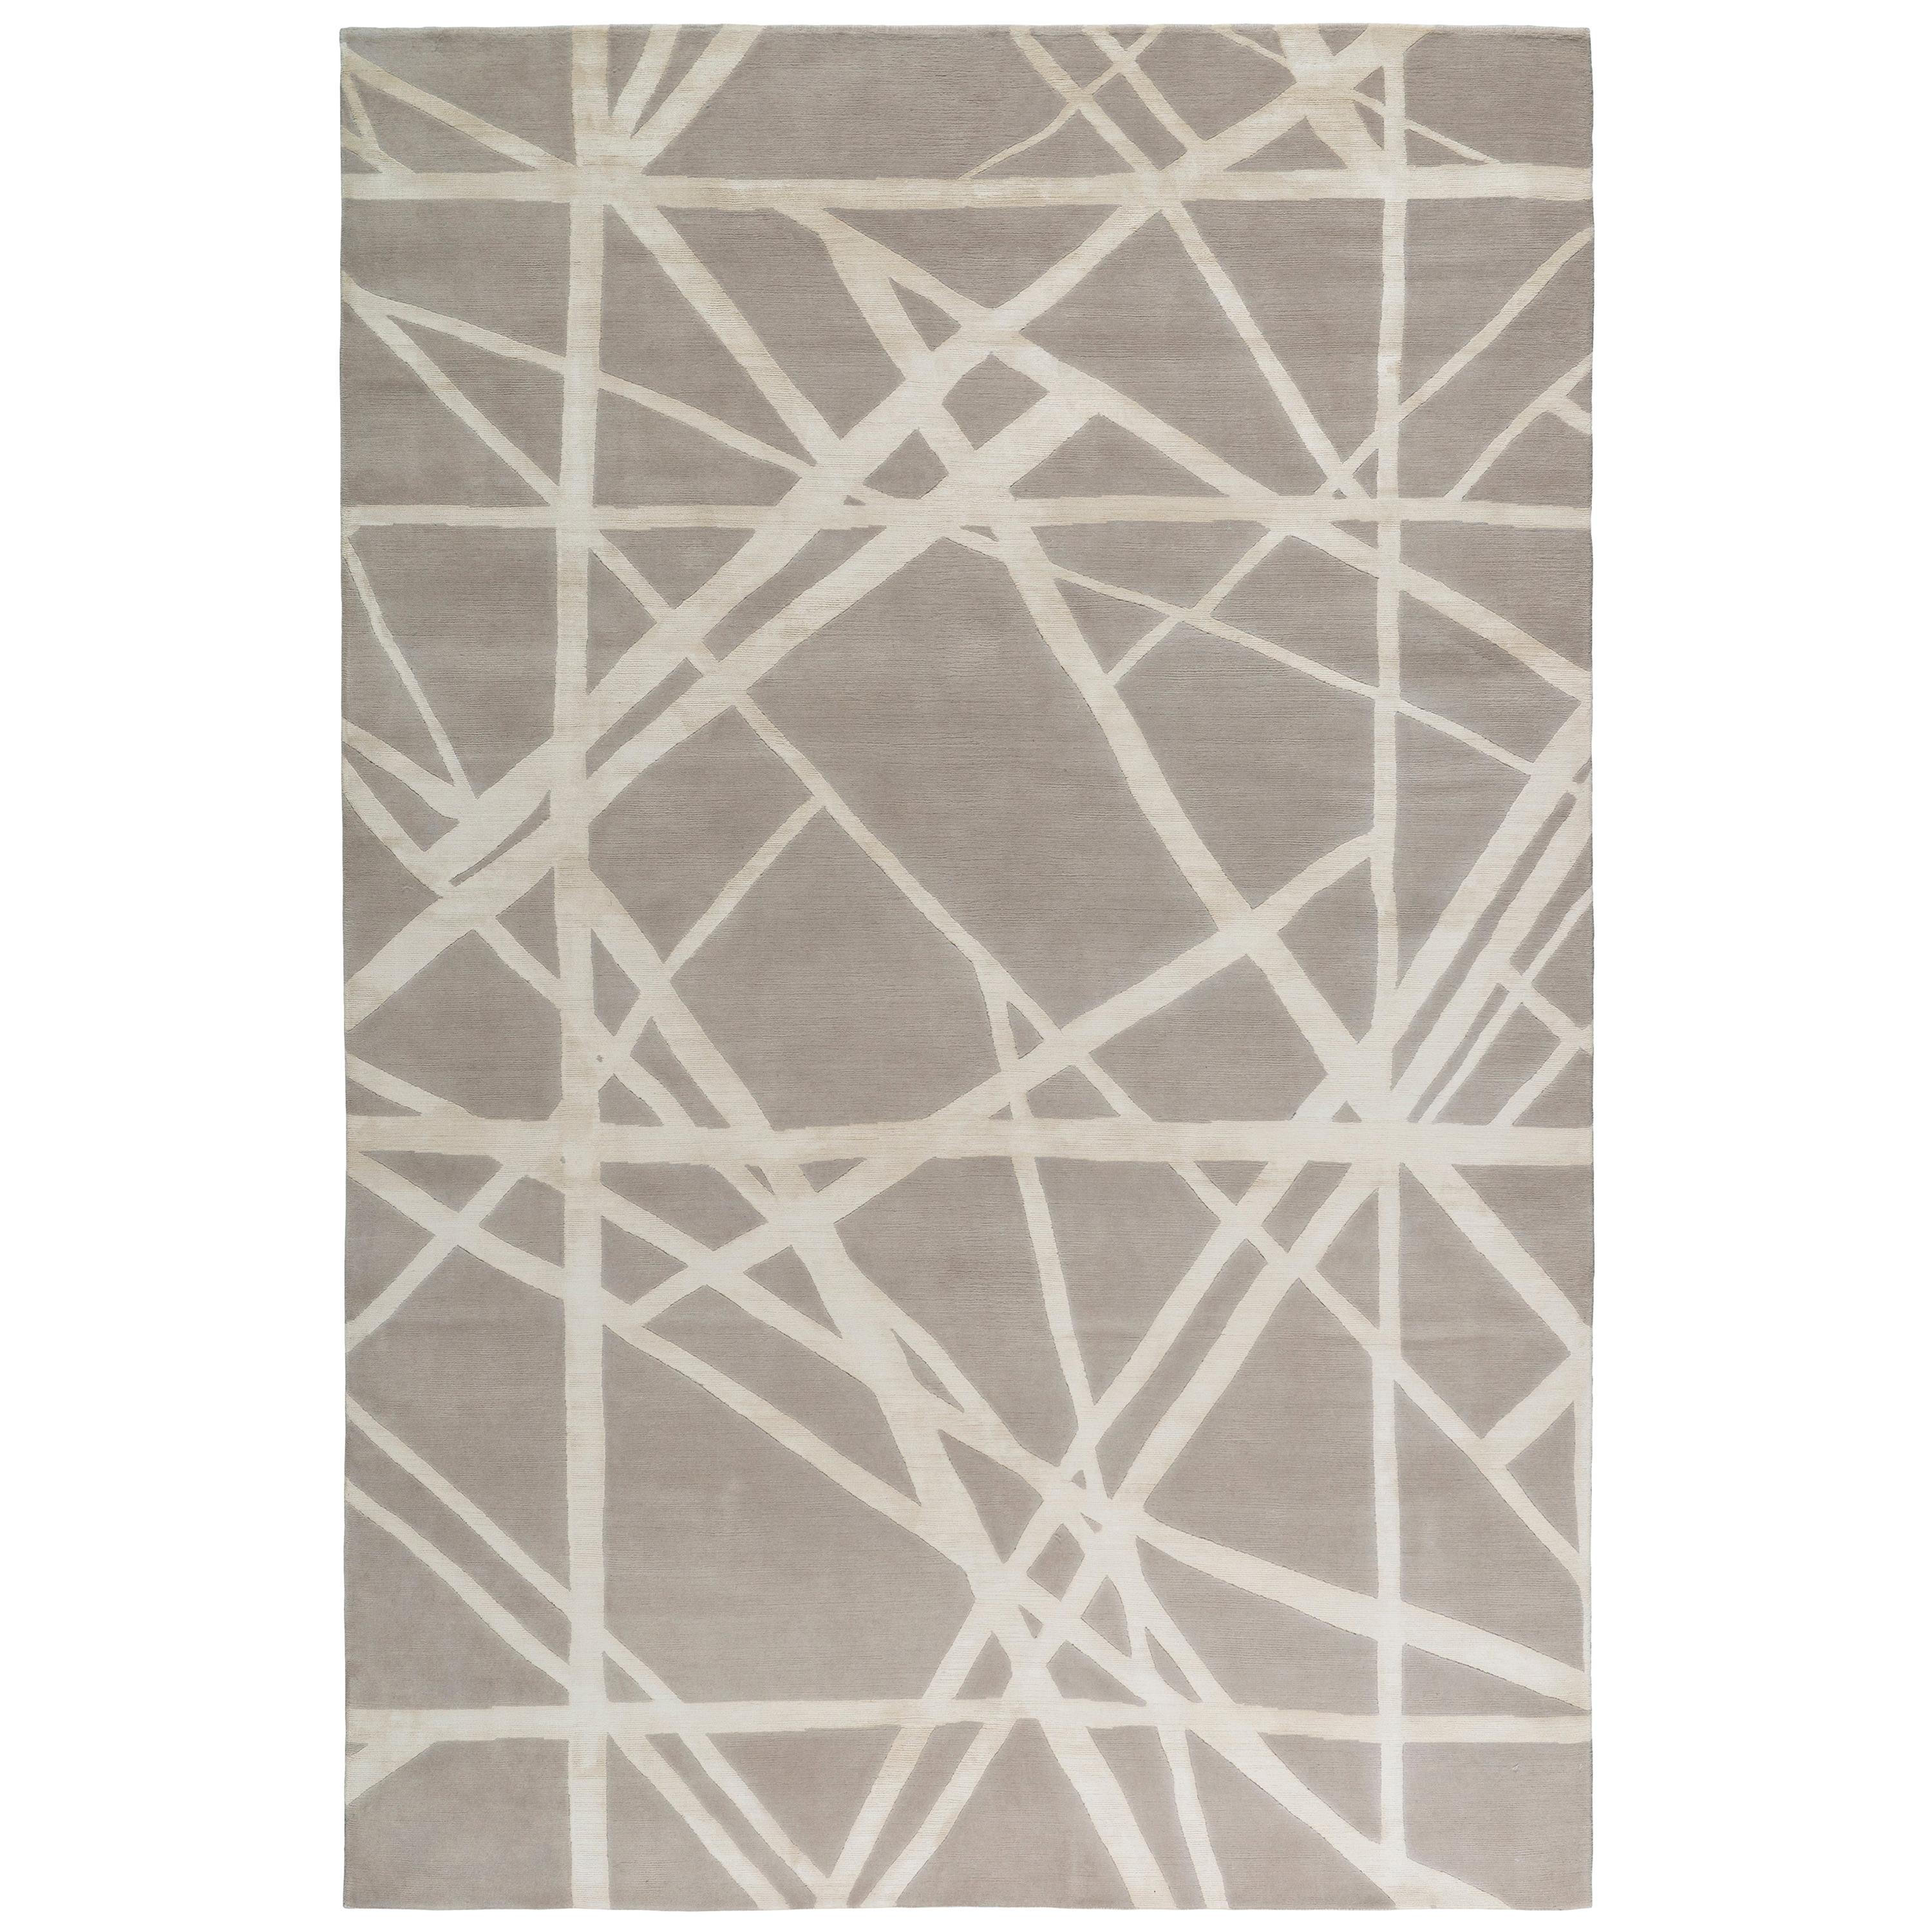 Channels Rug in Hand-Knotted Wool and Silk by Kelly Wearstler